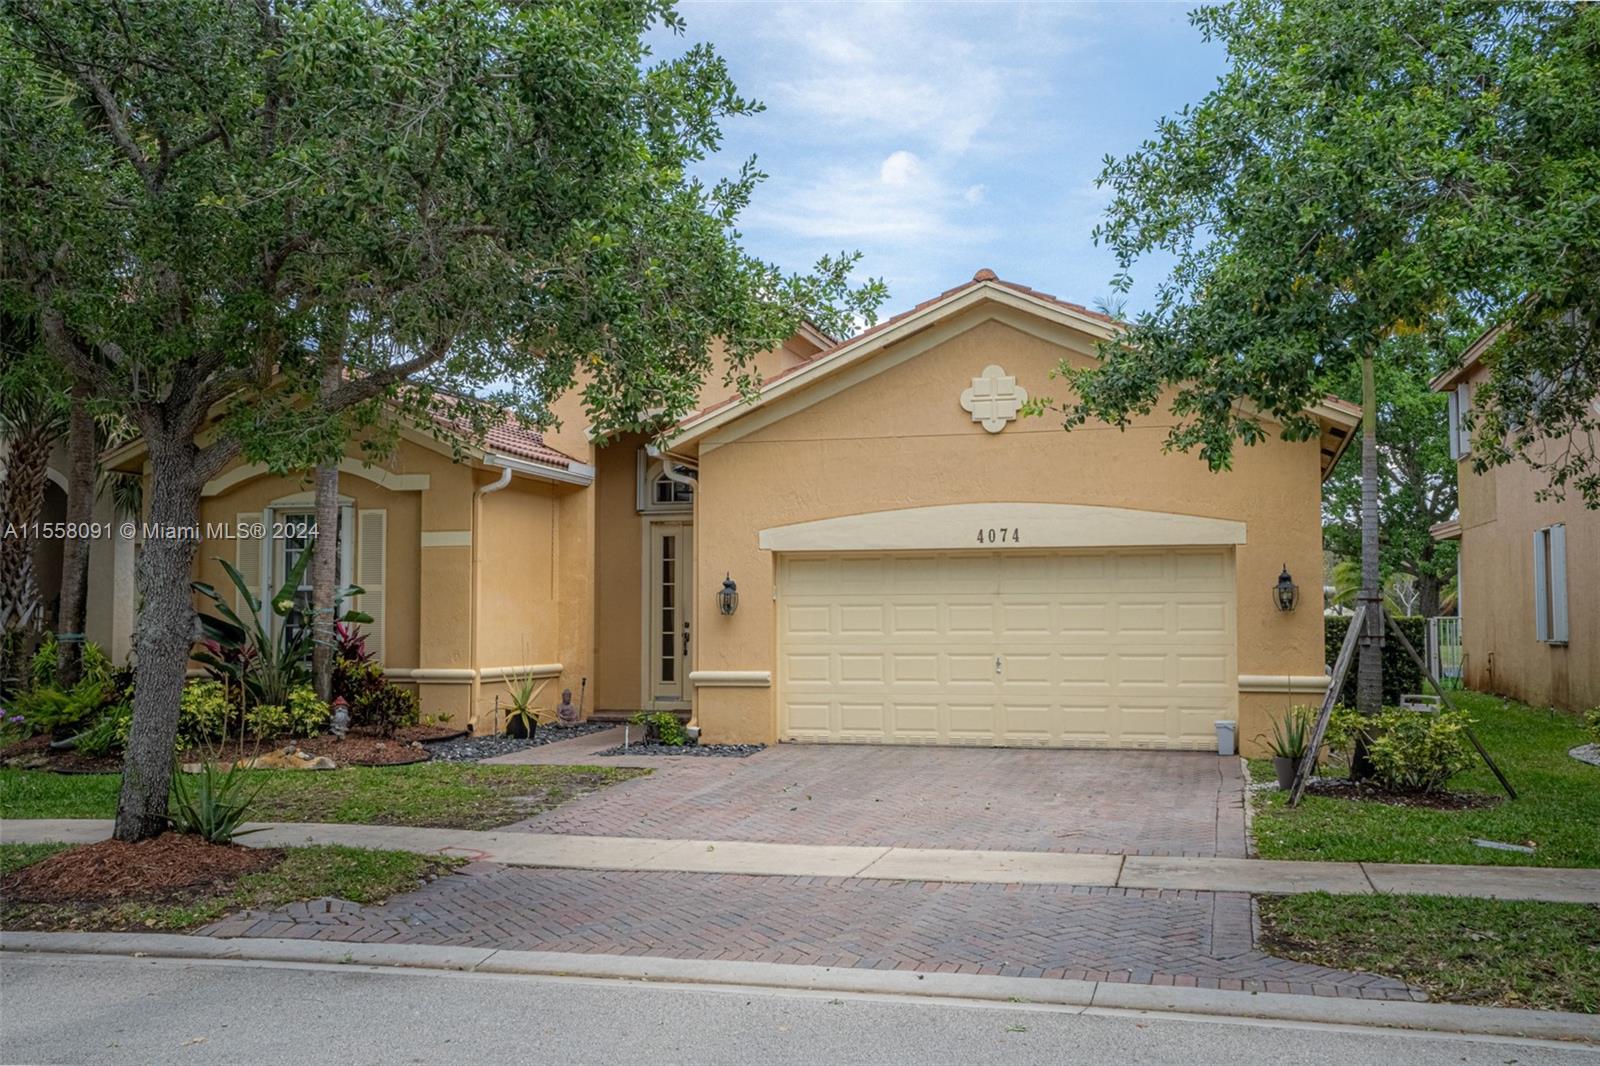 4074 W Whitewater Ave, Weston, Florida 33332, 4 Bedrooms Bedrooms, ,3 BathroomsBathrooms,Residential,For Sale,4074 W Whitewater Ave,A11558091